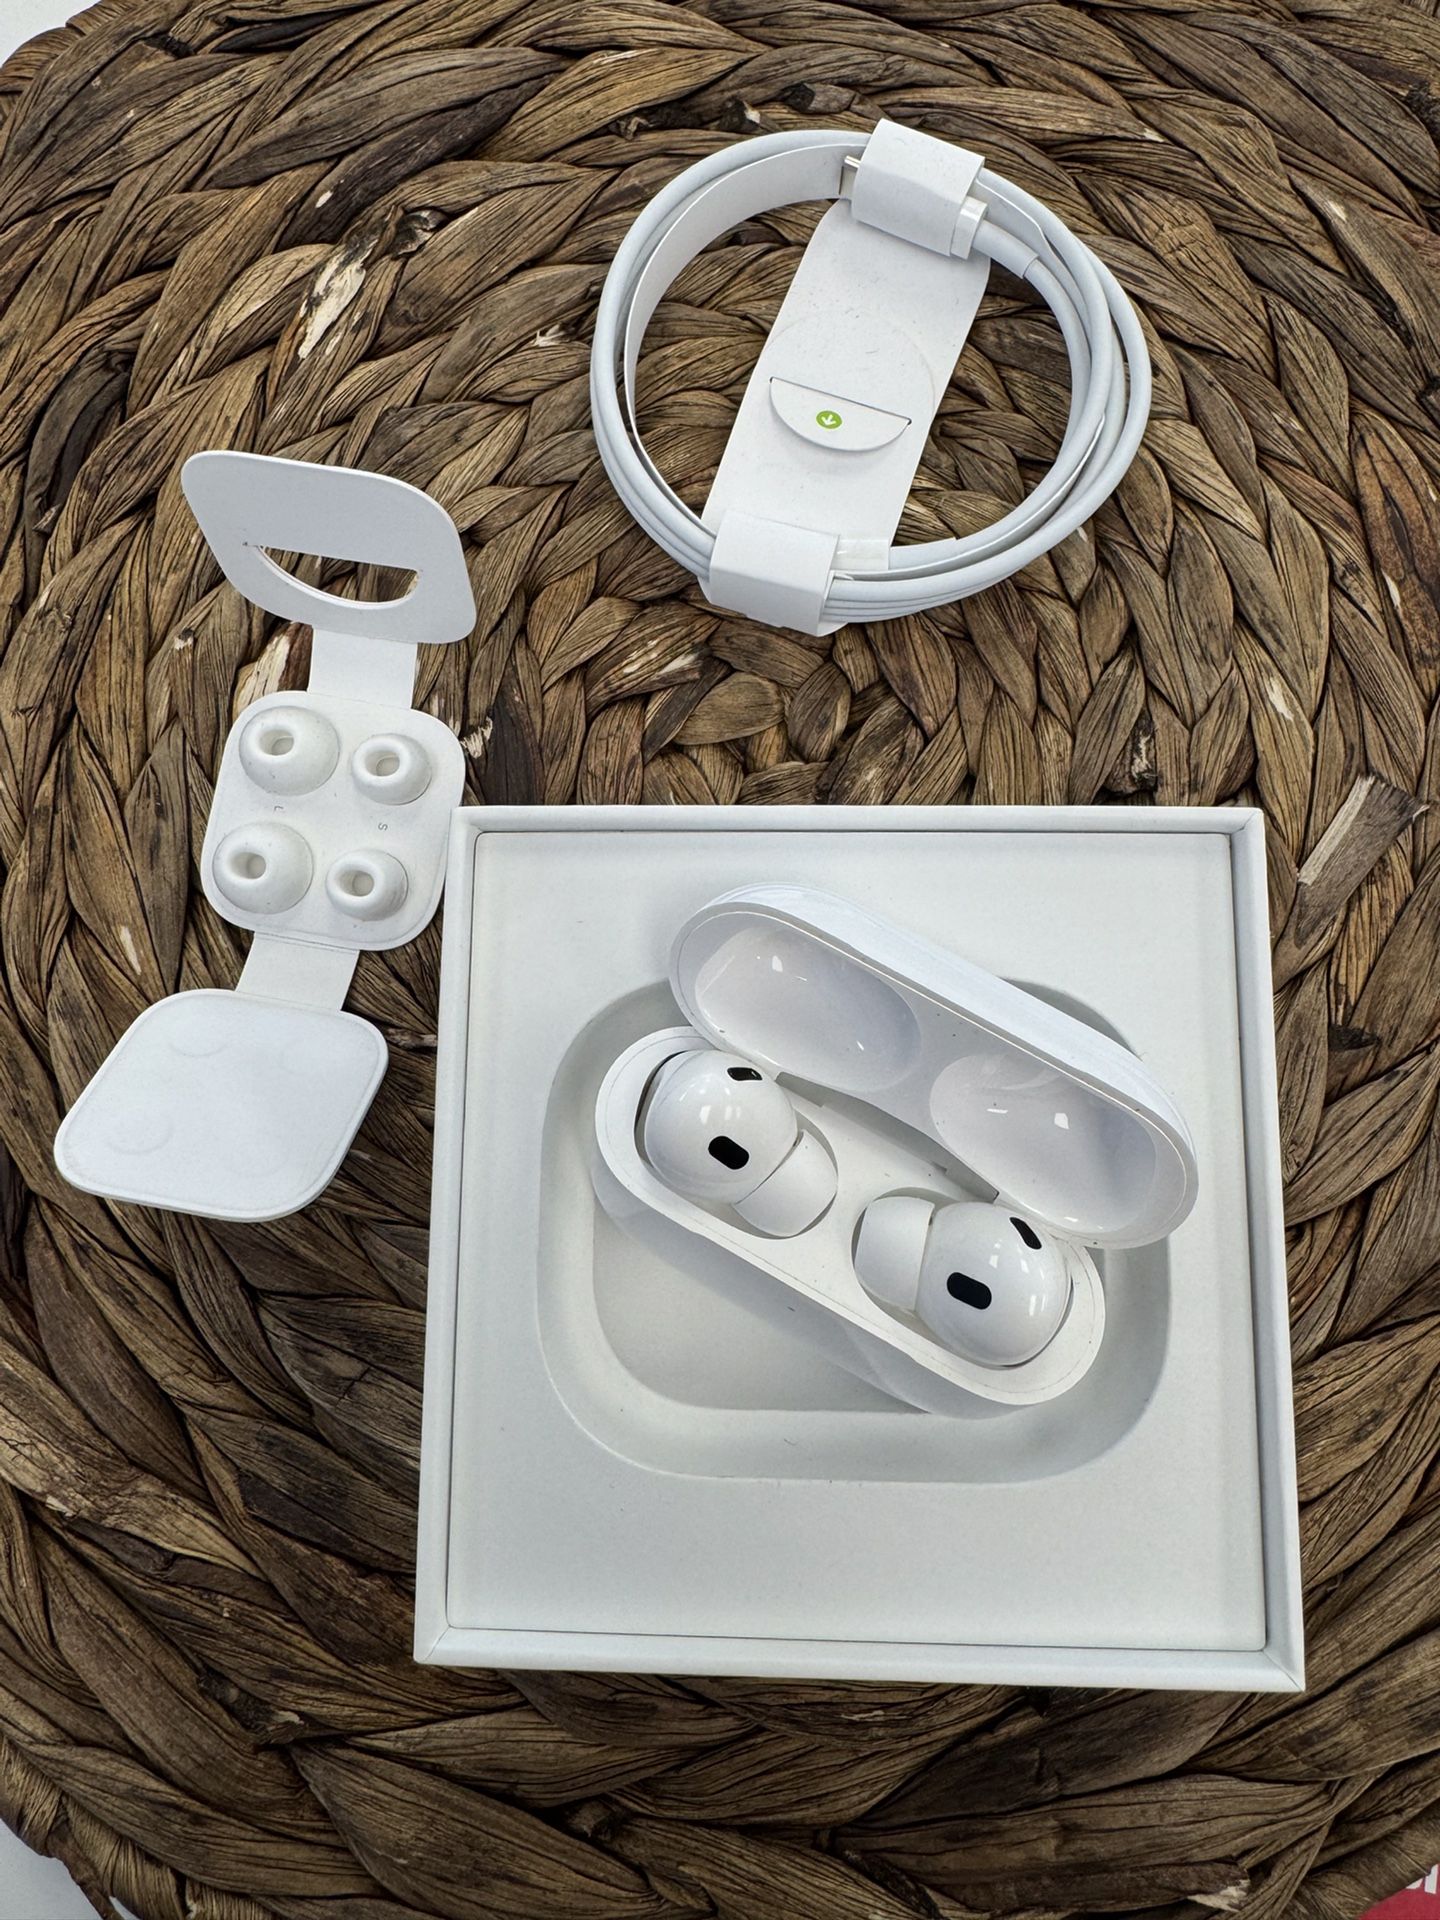 Apple Airpods Pro 2 Bluetooth Earbuds - Pay $1 Today to Take it Home and Pay the Rest Later!